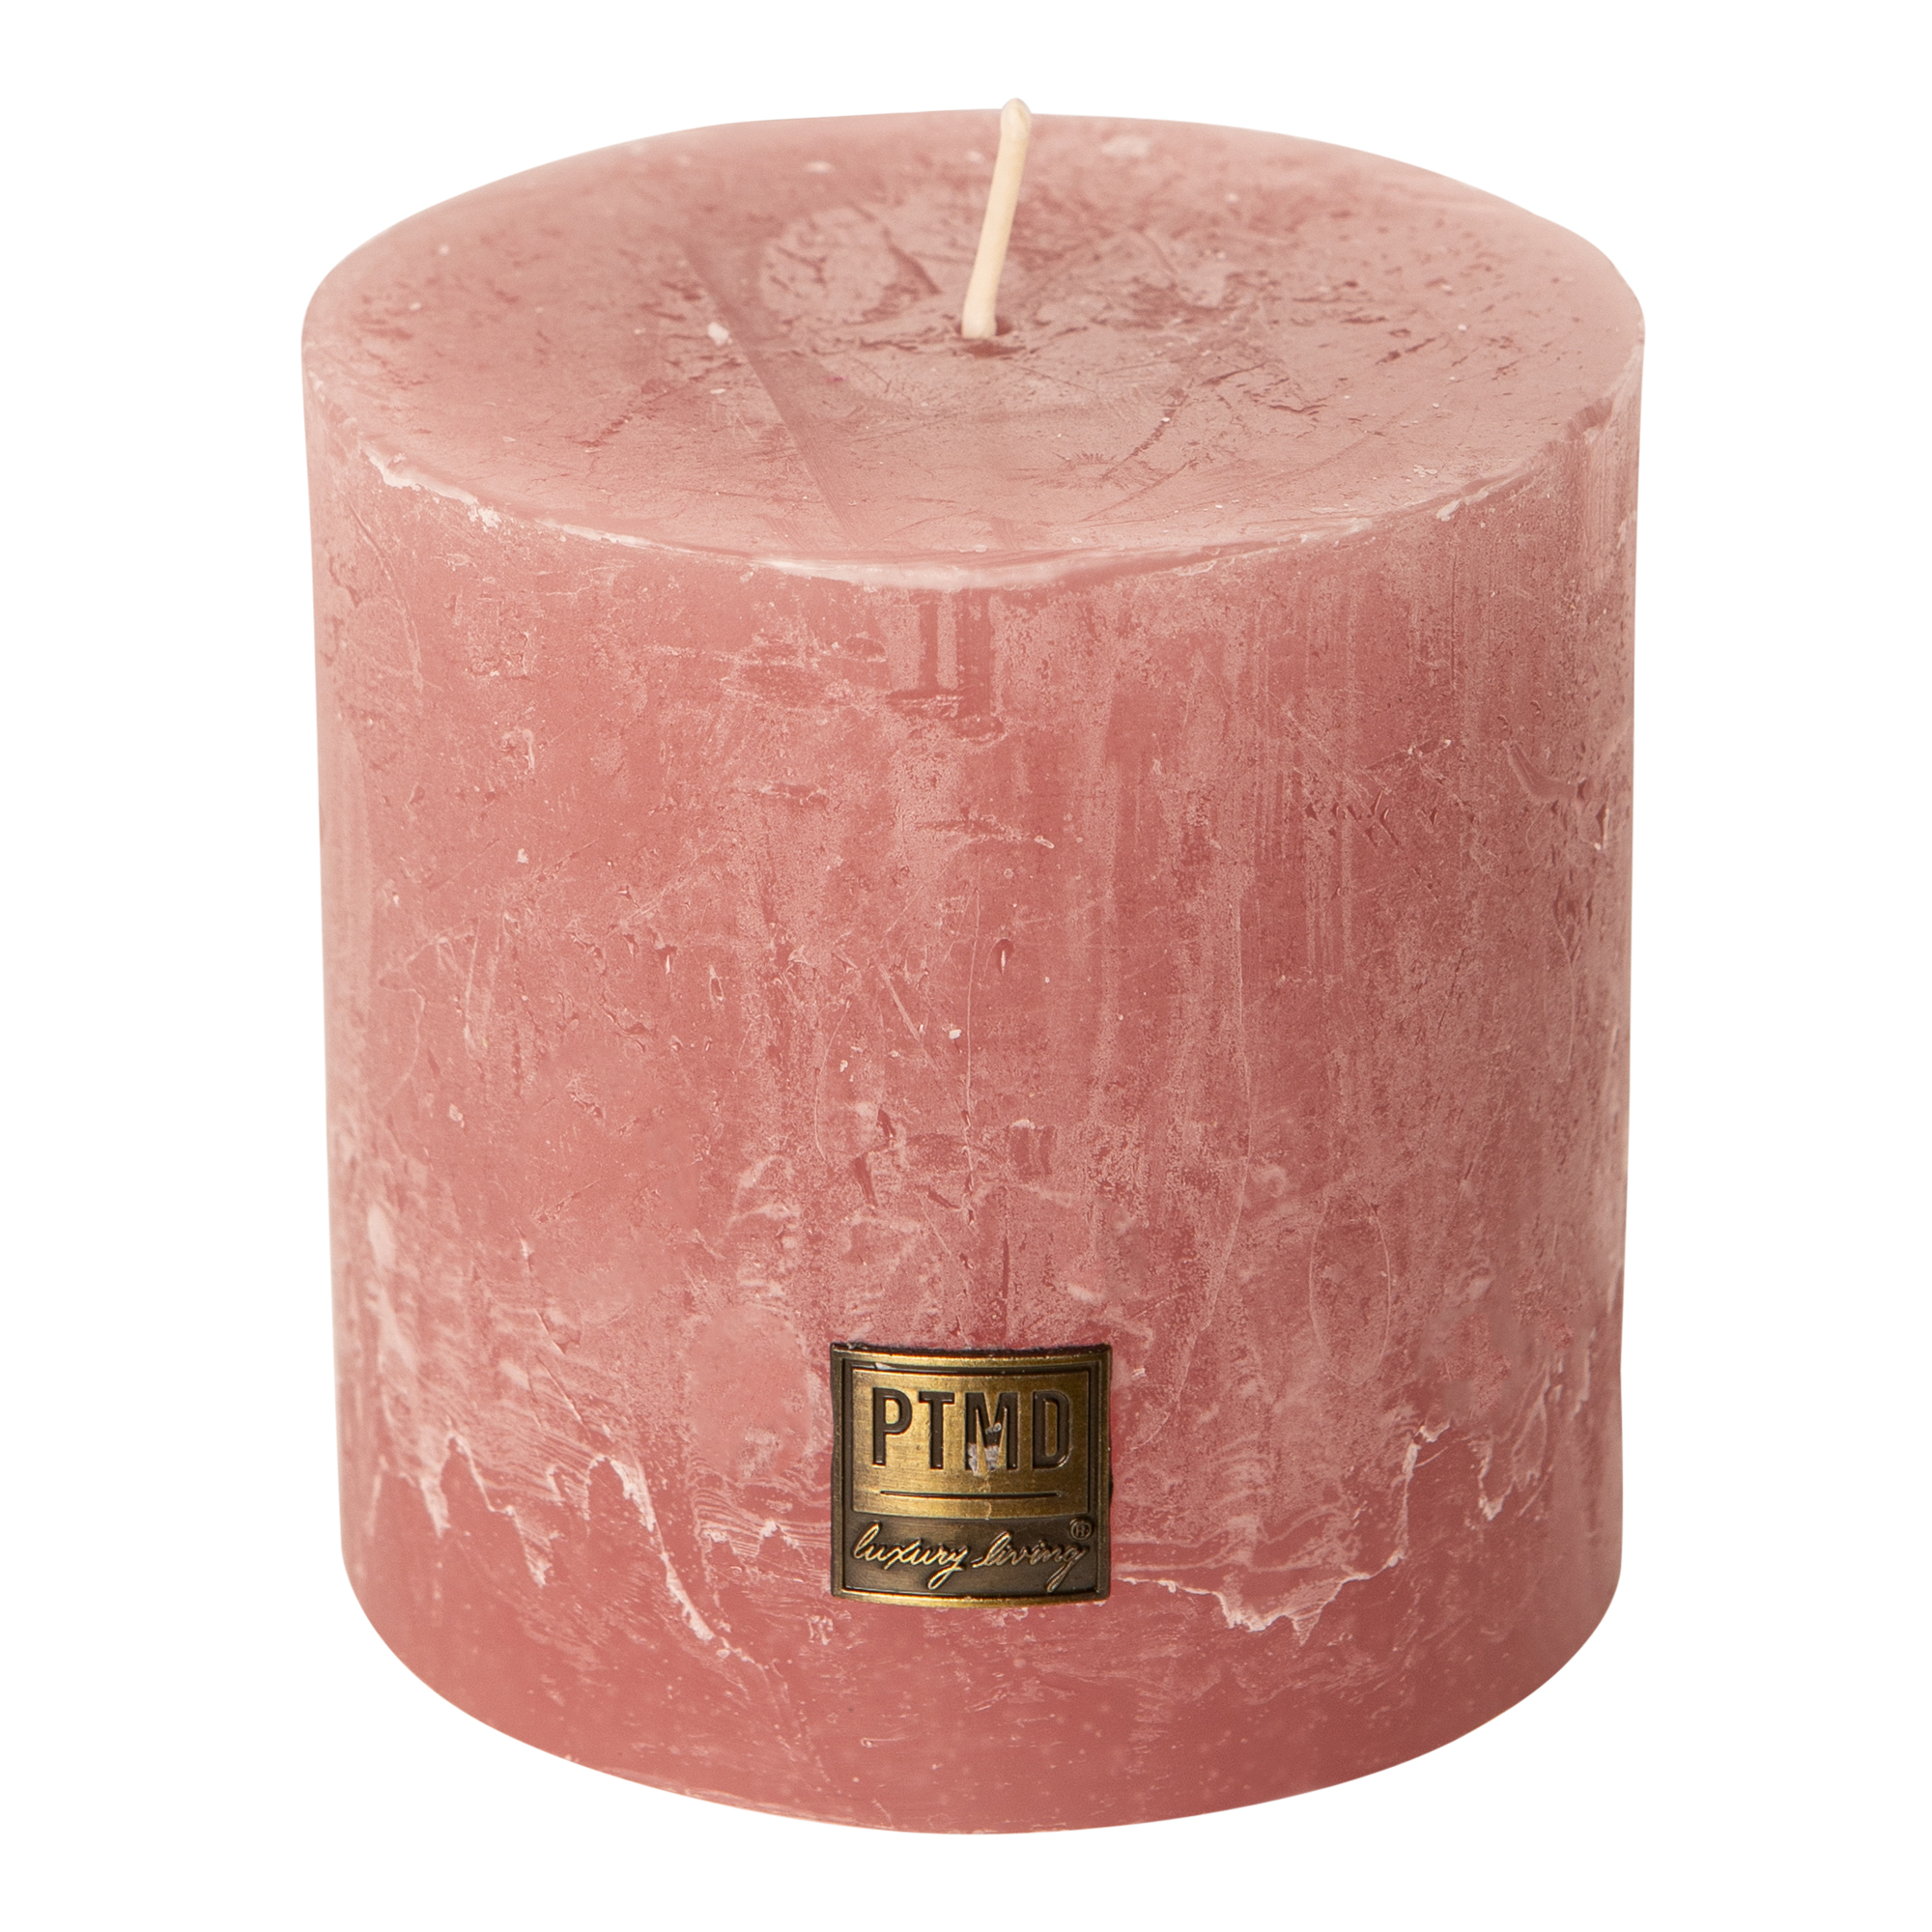 PTMD 10 x 10cm Blush Pink Rustic Block Candle